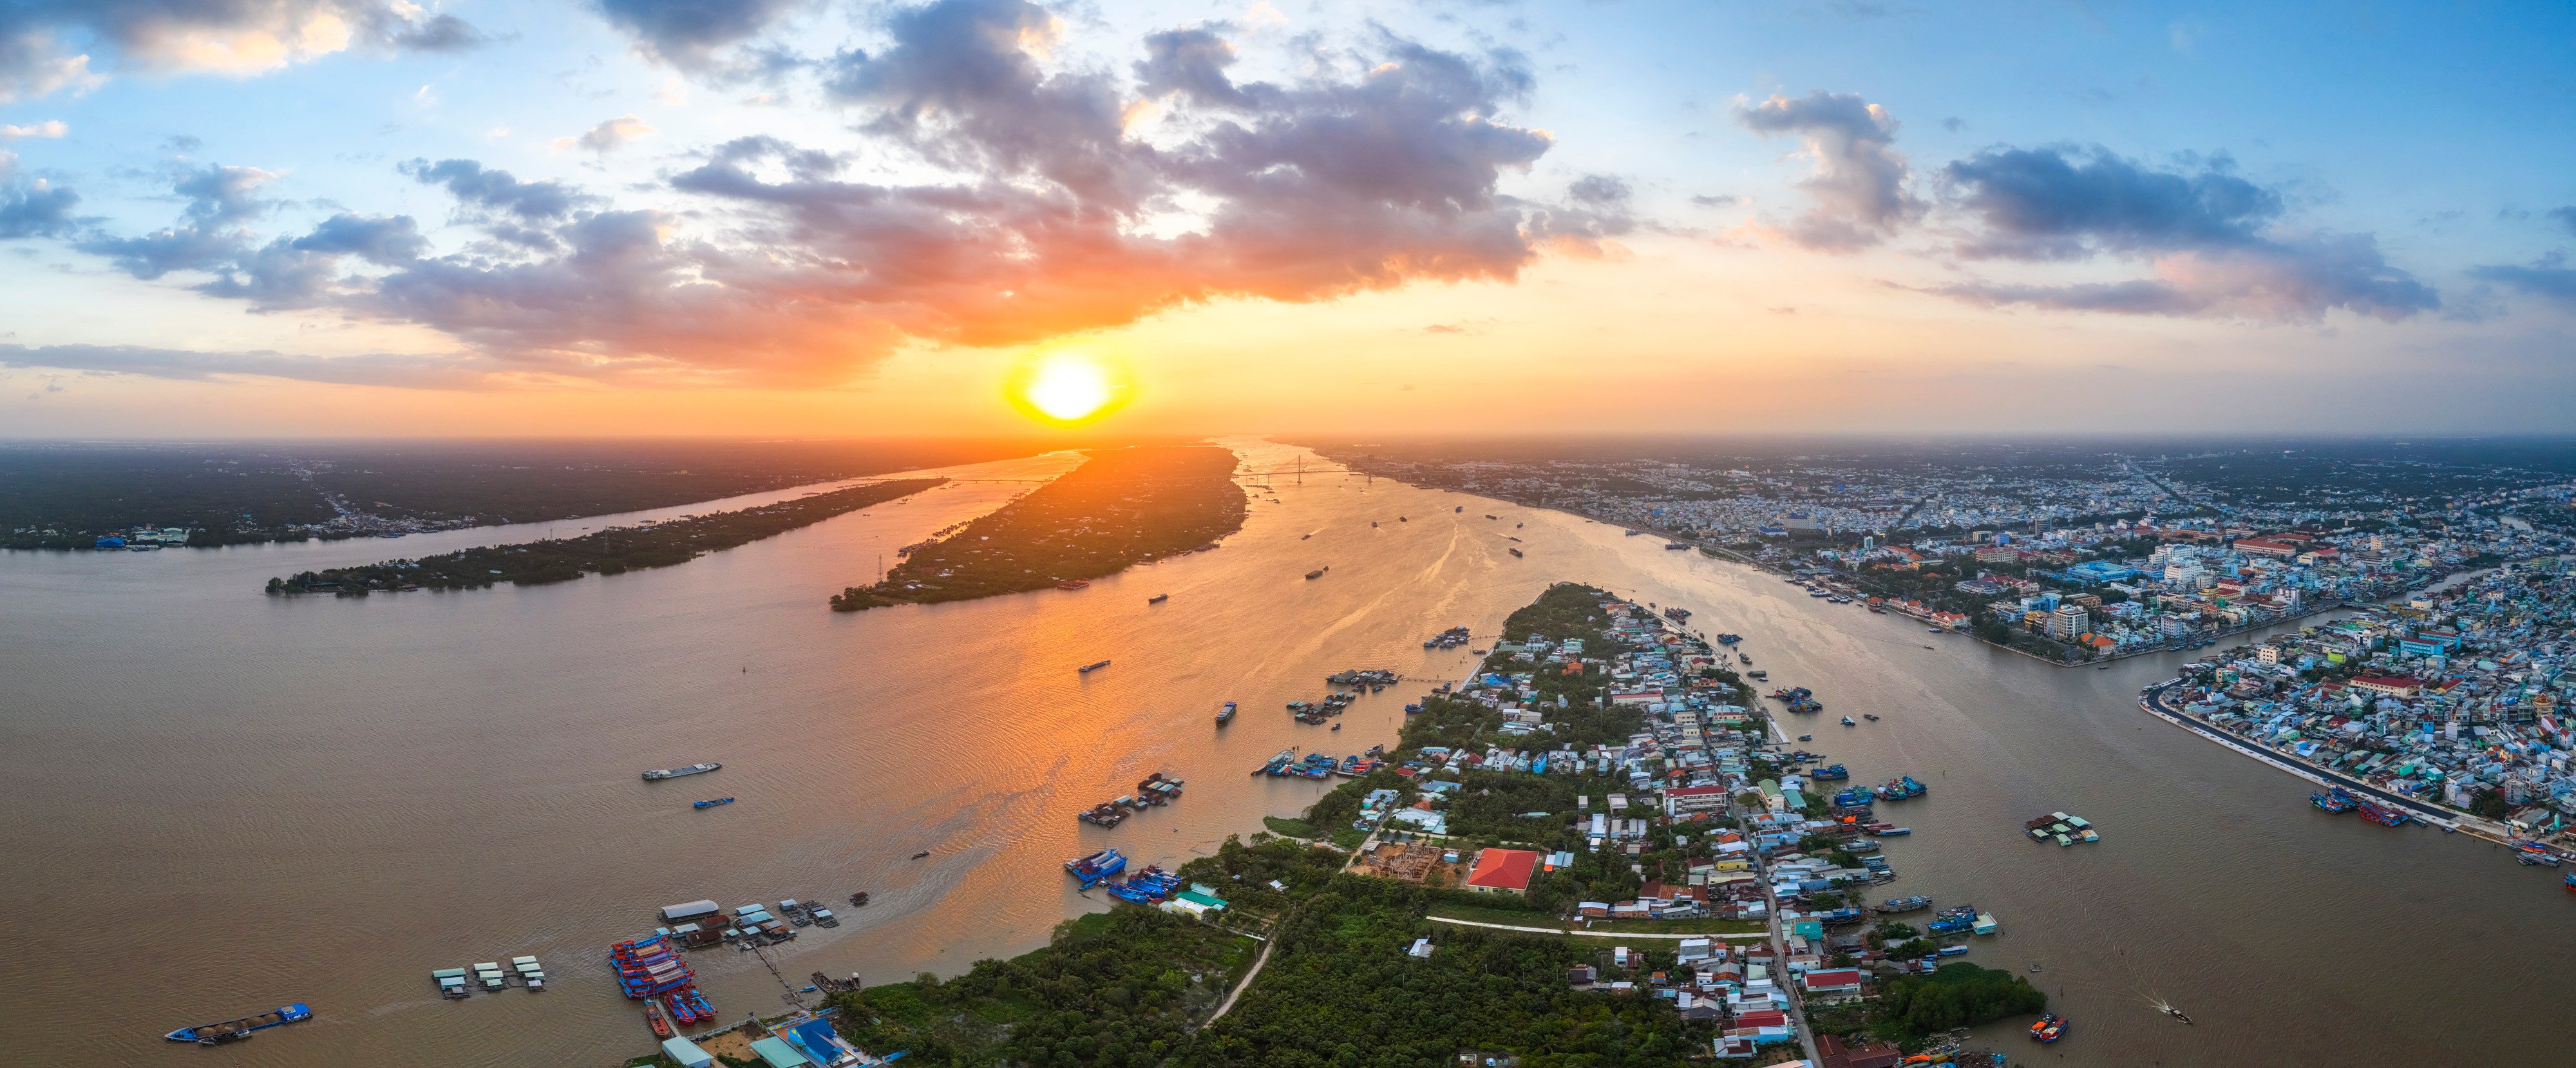 A sunset over the Mekong River near My Tho city, in southern Vietnam. Photo: Shutterstock